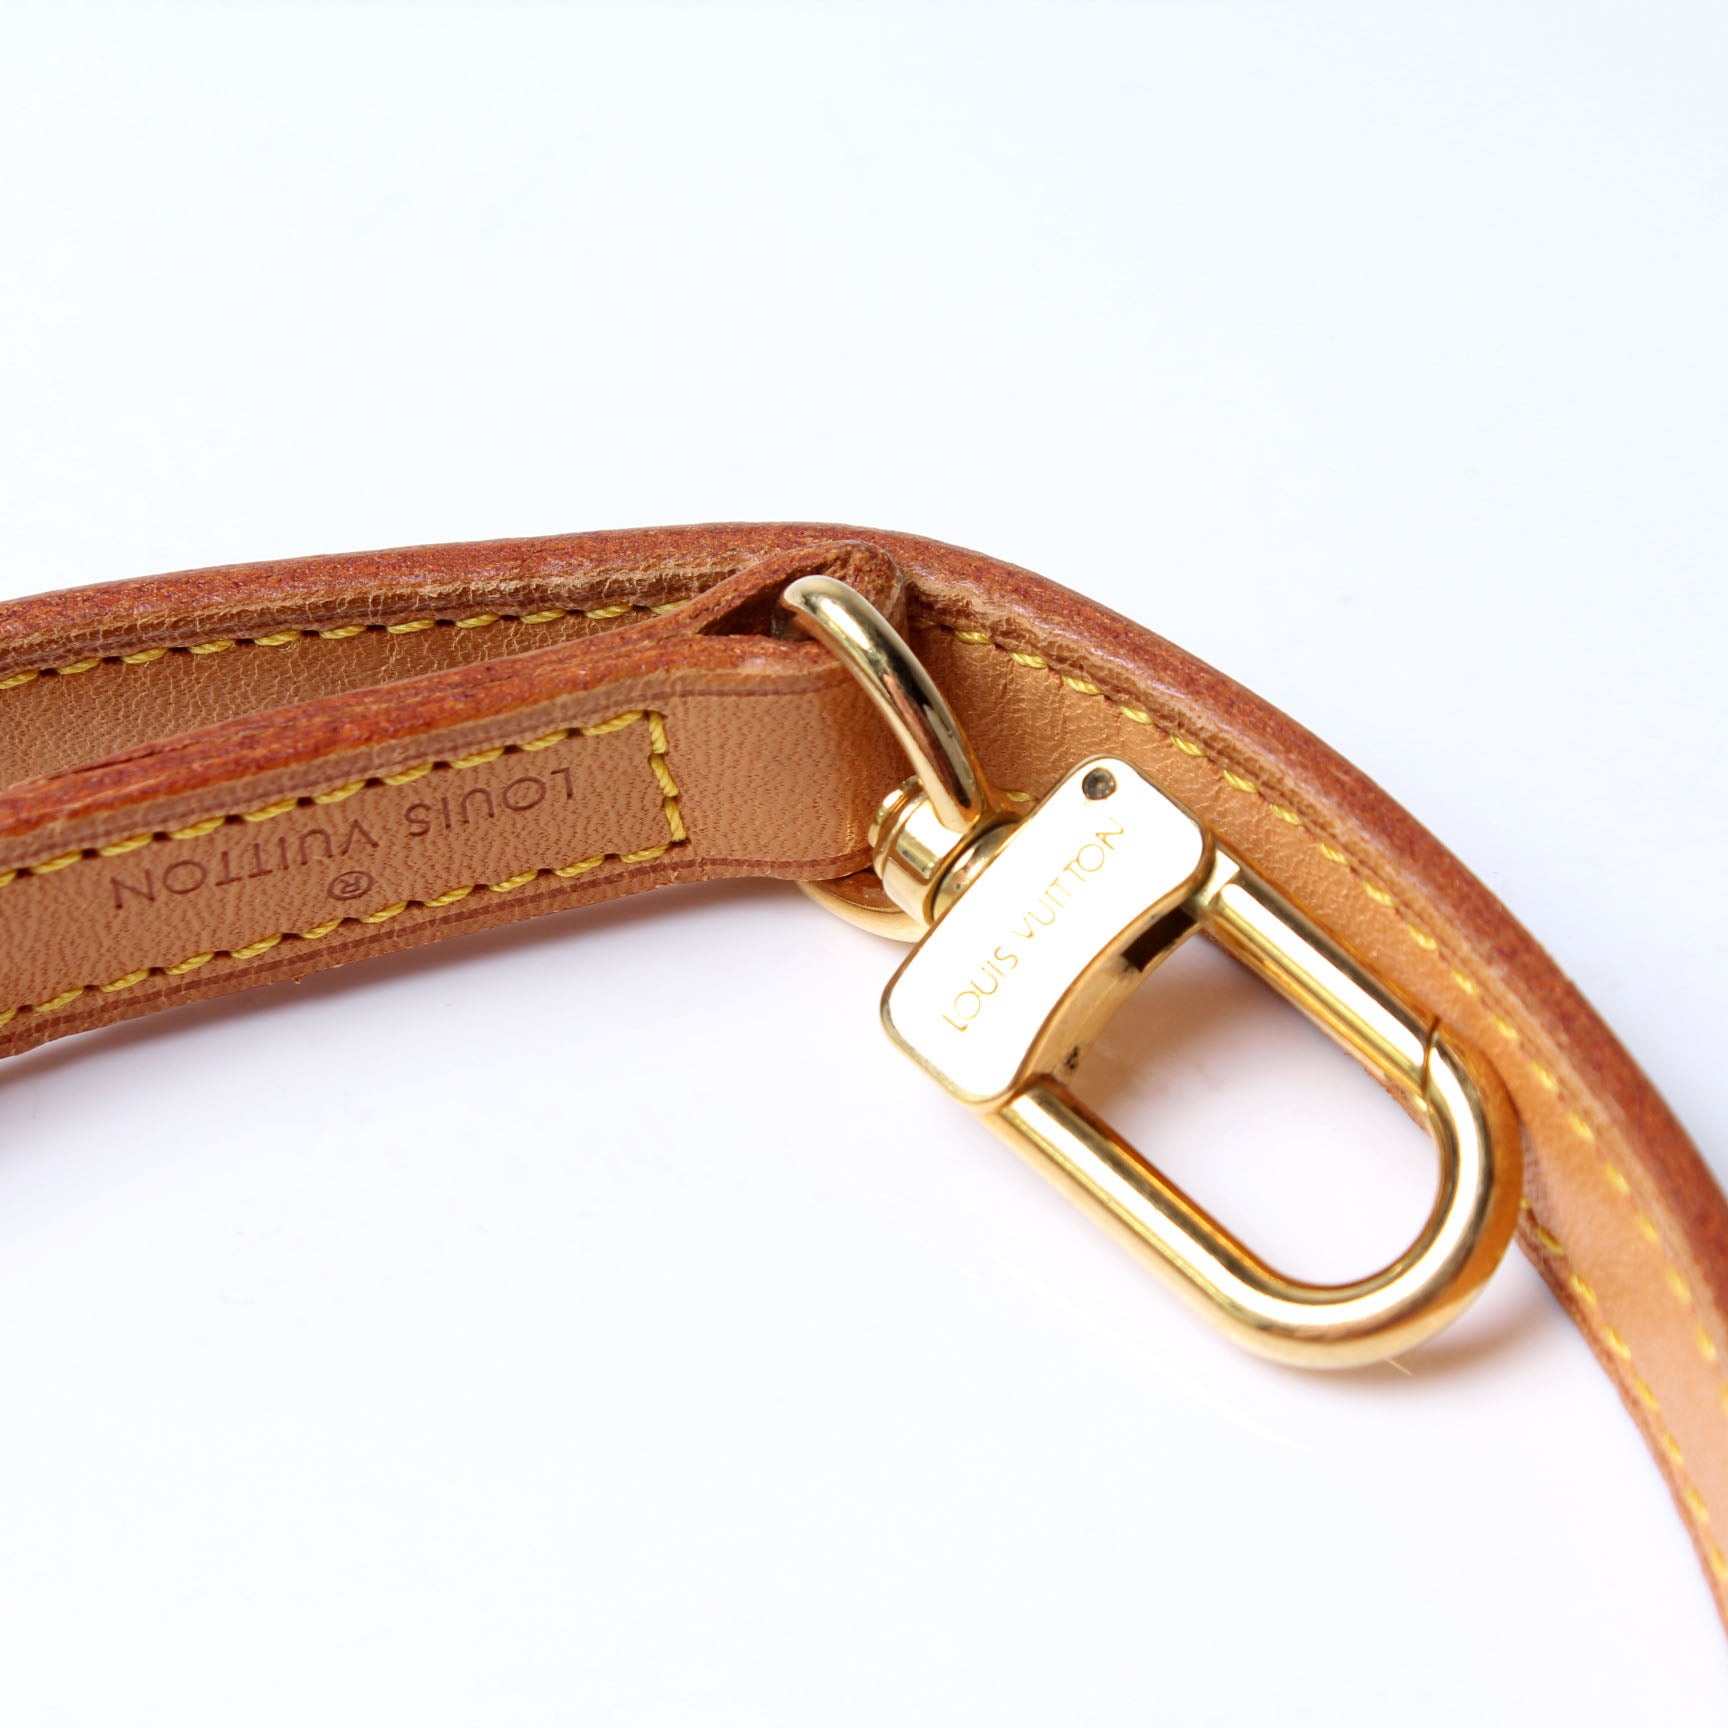 New Vachetta Leather Crossbody Shoulder Strap Replacement For Louis Vuitton